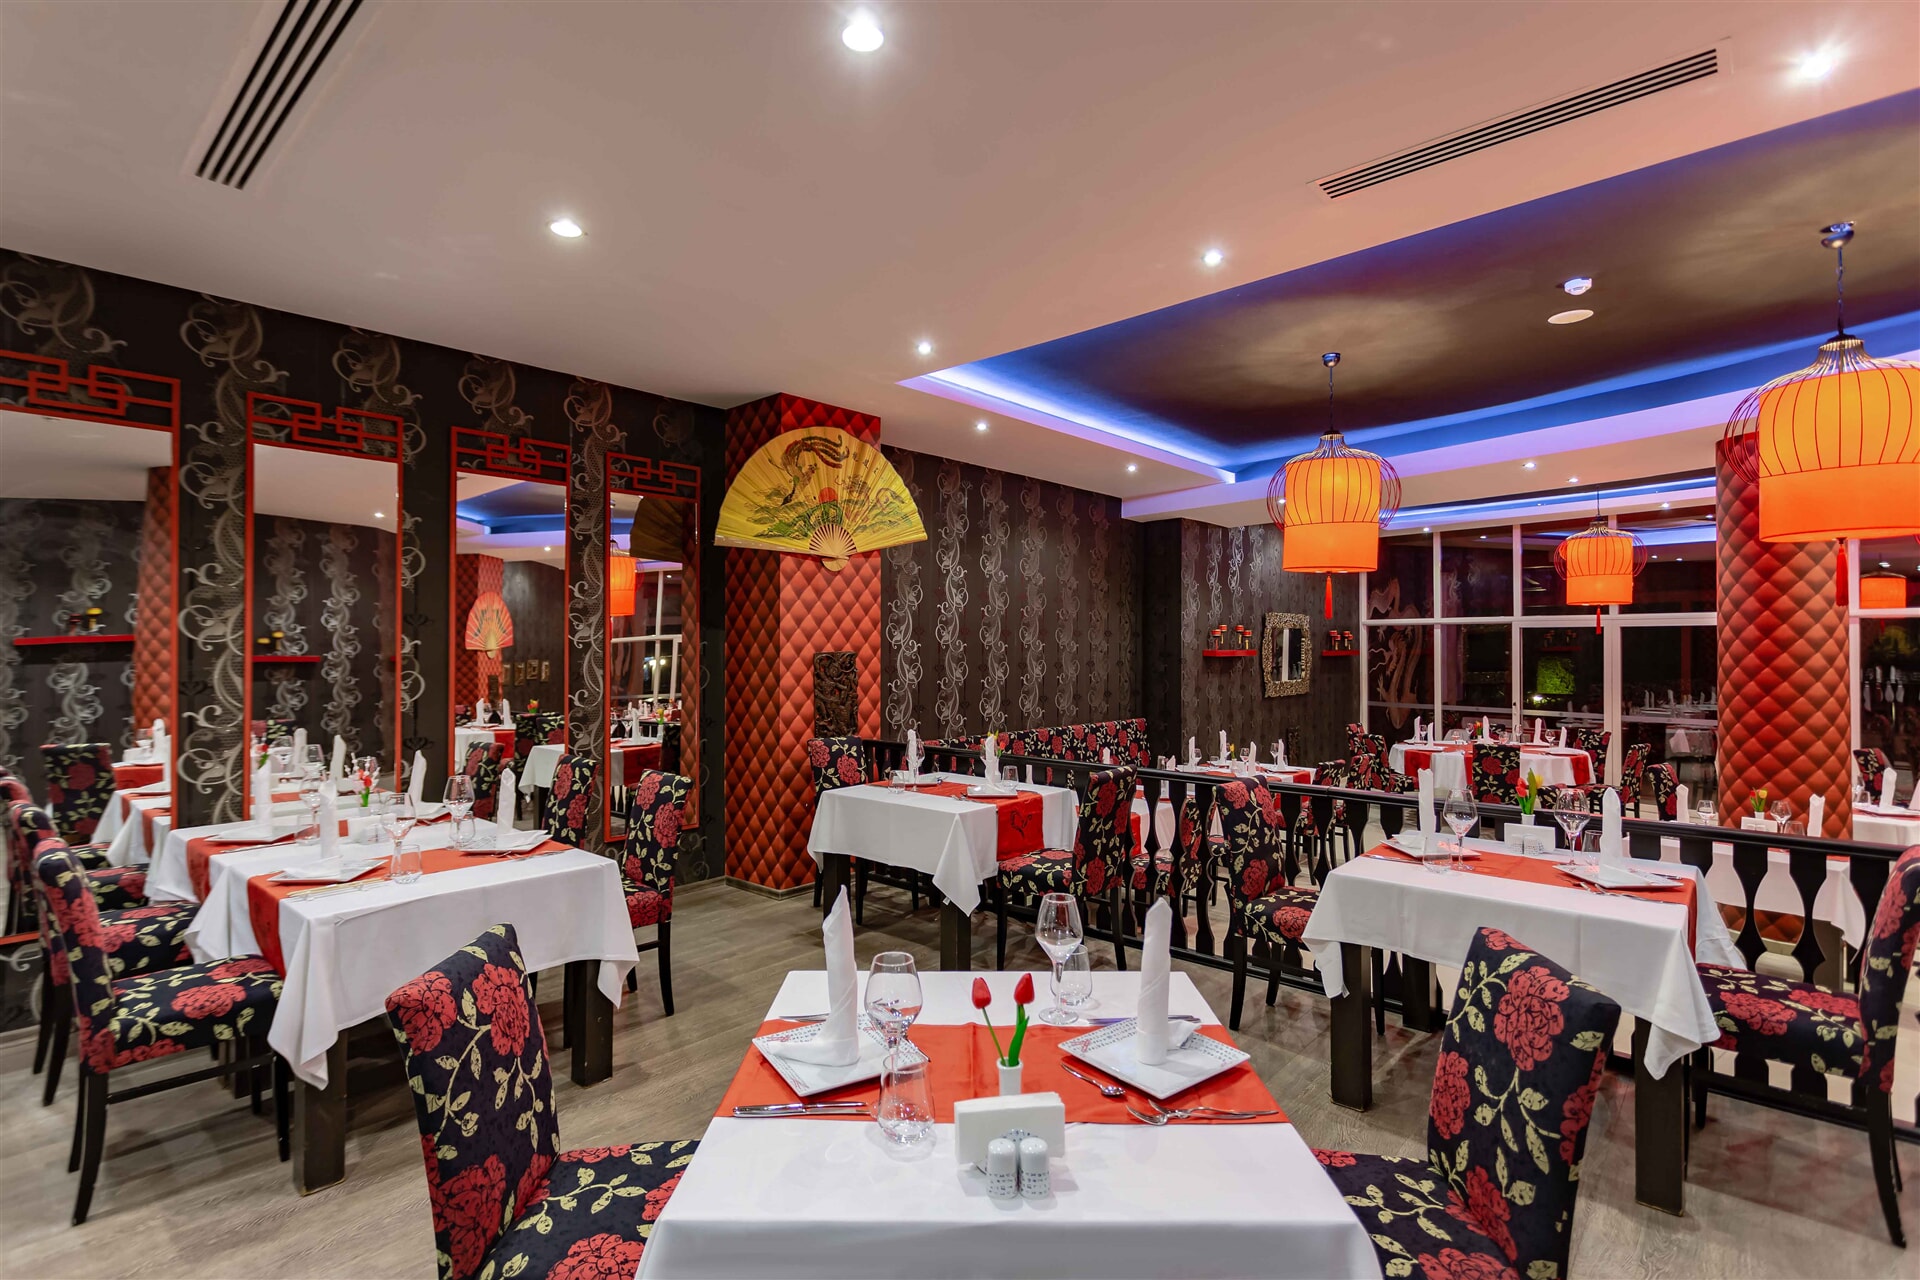 An elegant environment where you can experience the diffrent plates of the Far East.